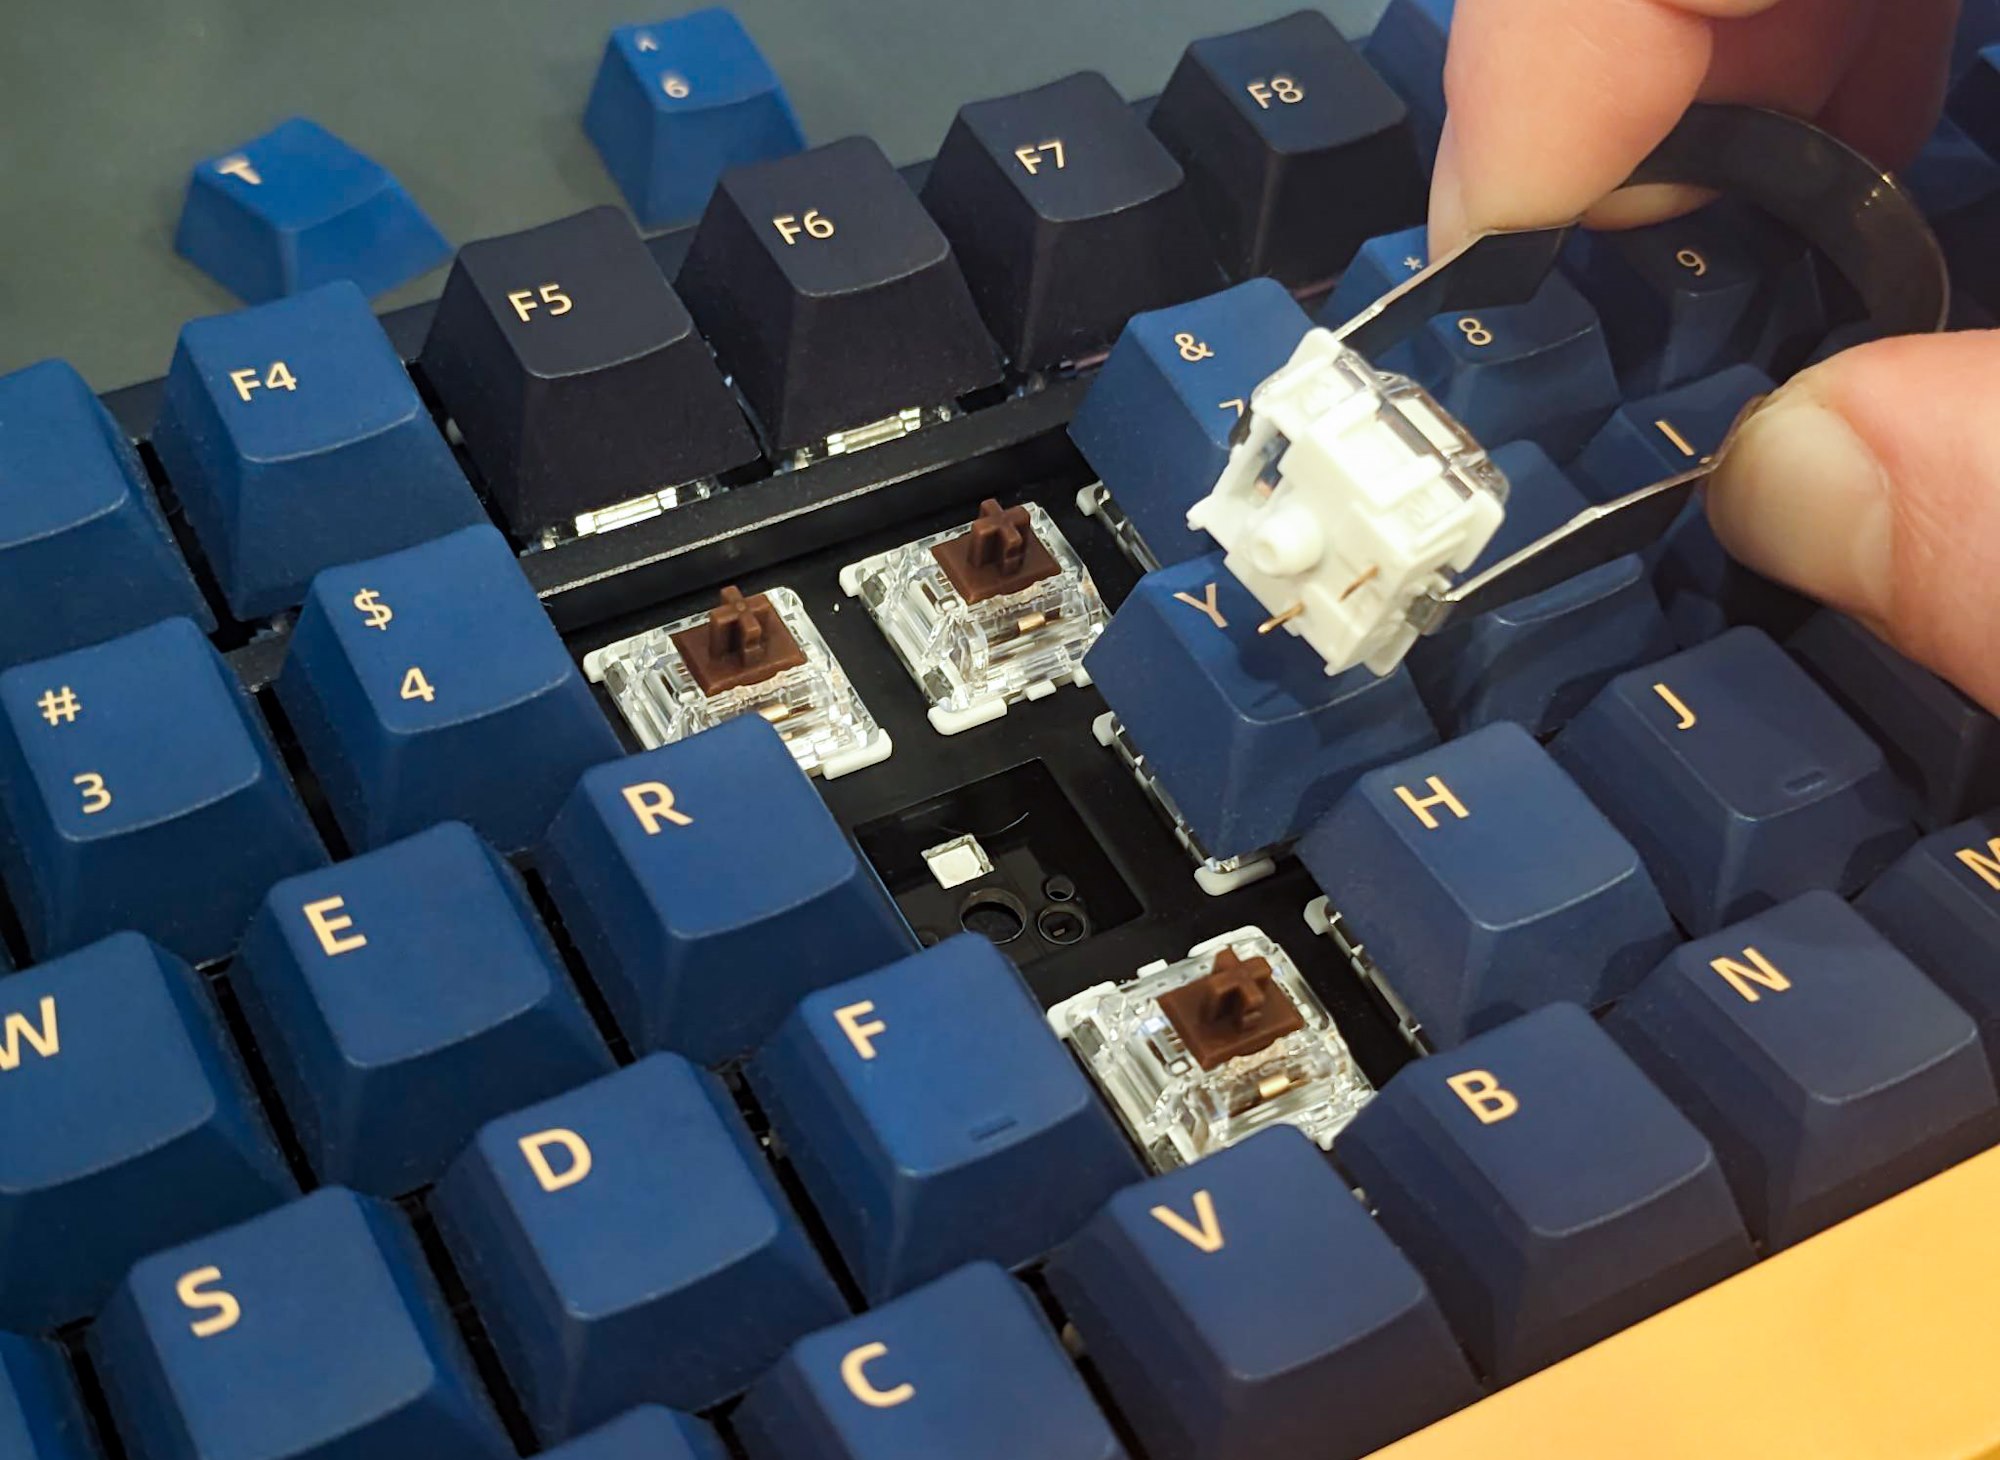 A person holding a removed switch using the switch puller included with the ROG Azoth keyboard